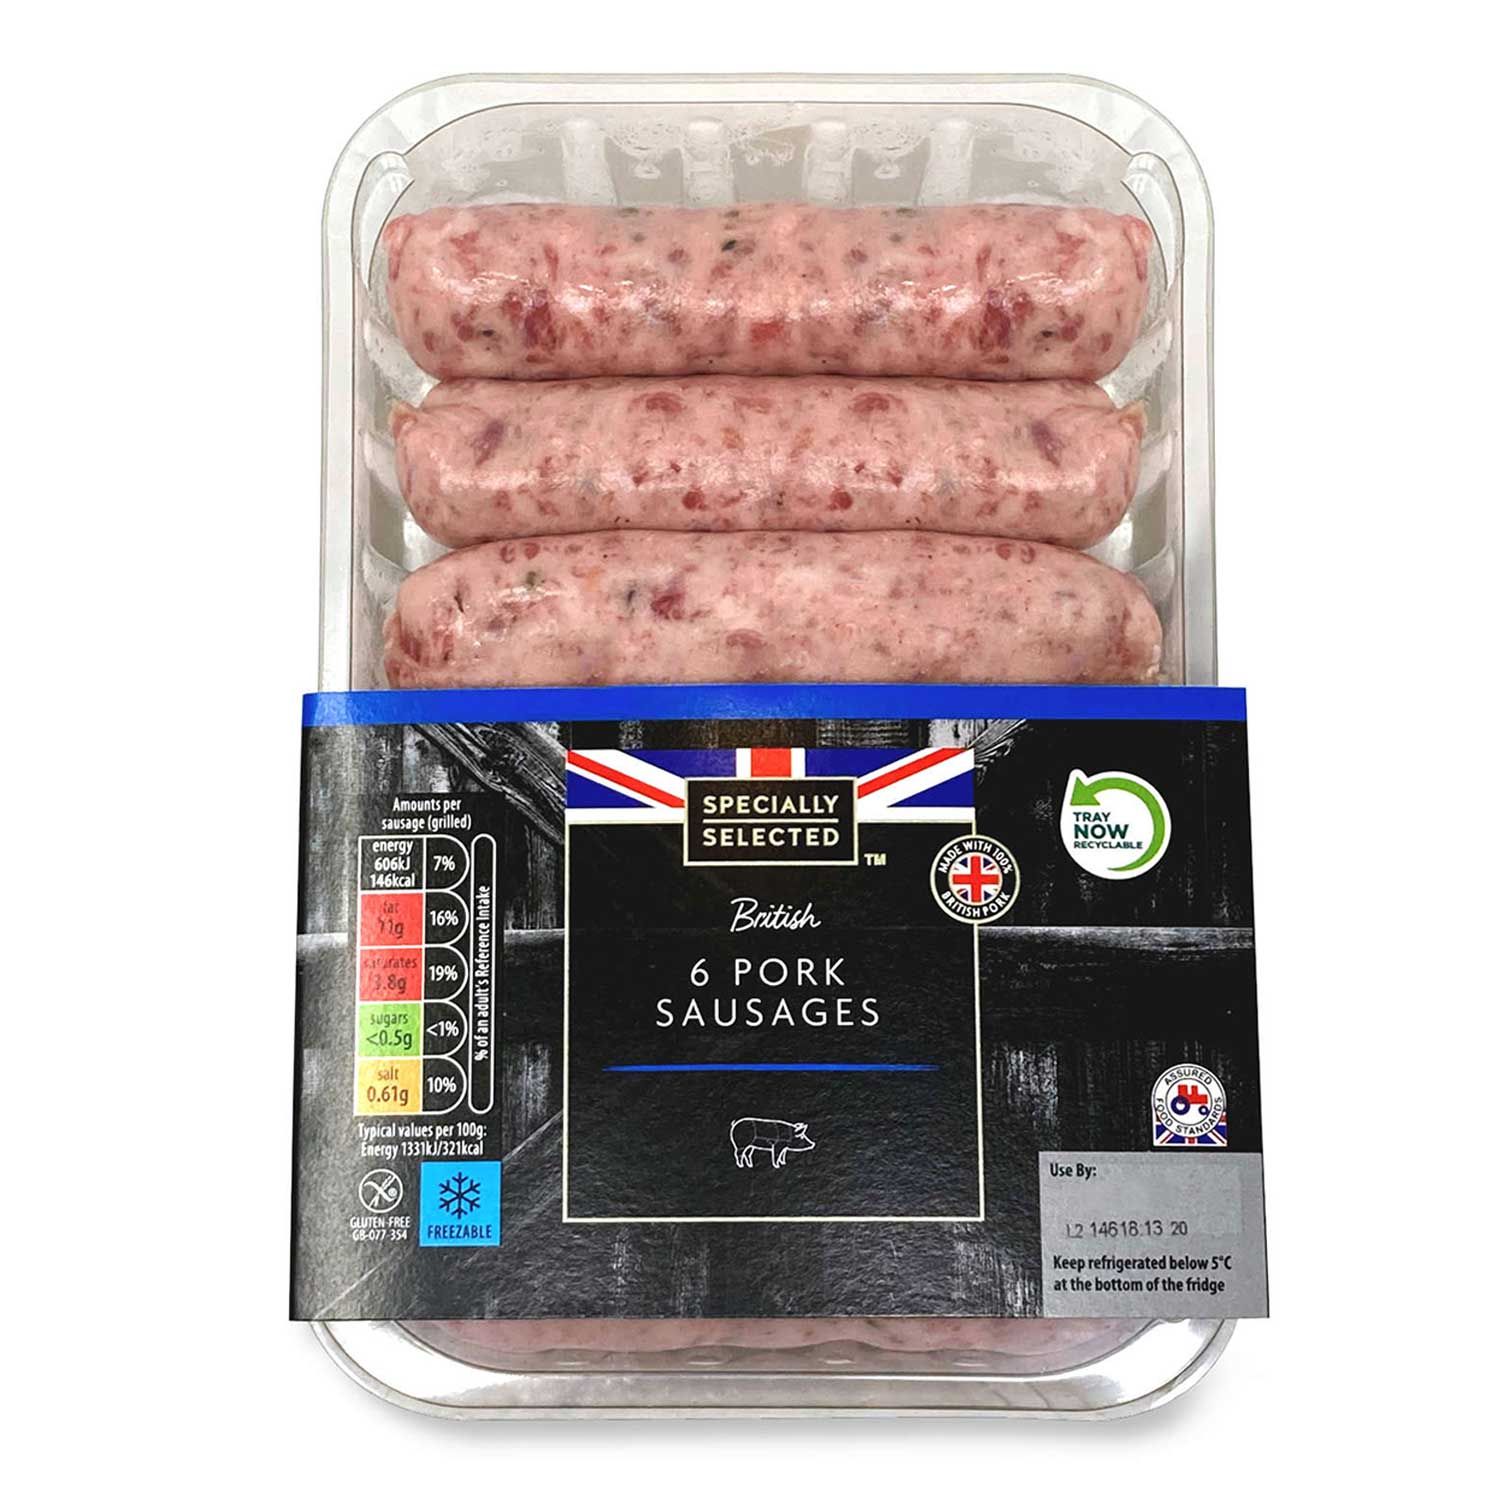 Specially Selected 6 British Pork Sausages 400g Aldi 1476